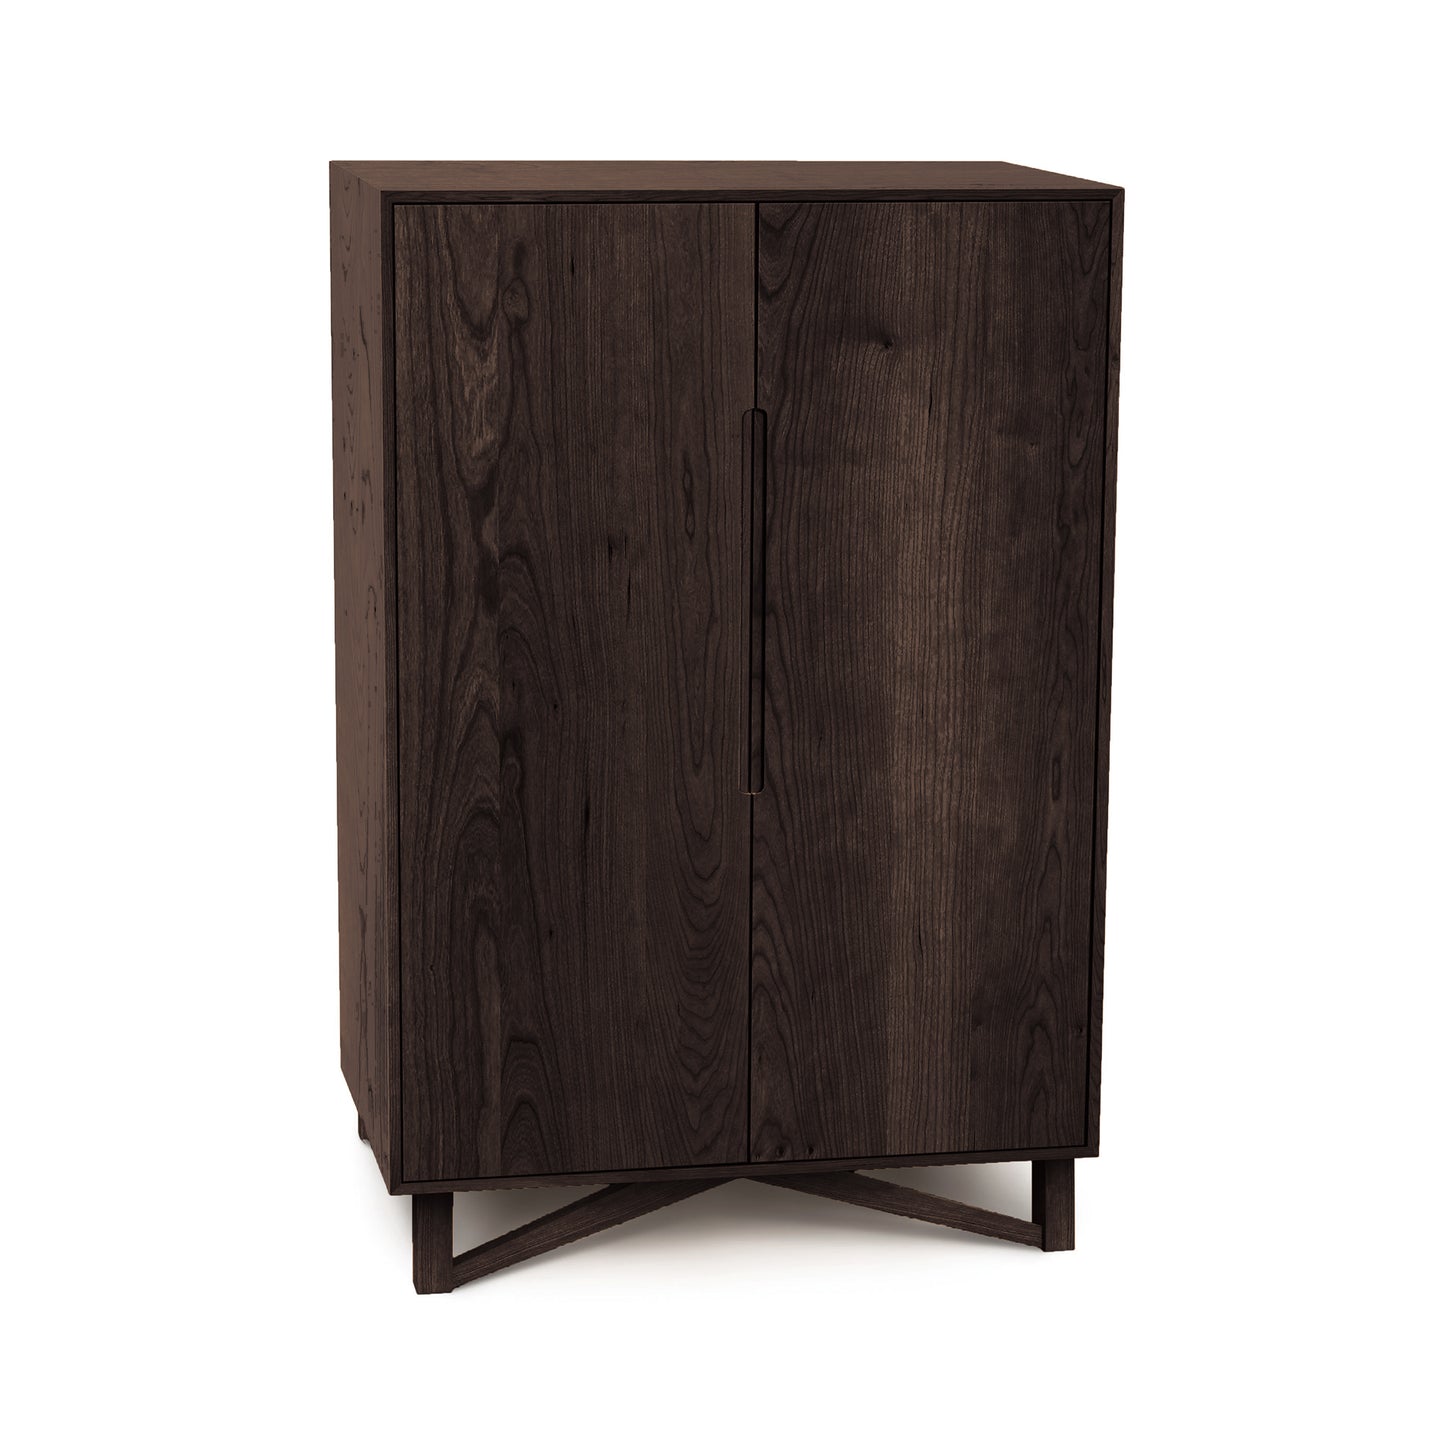 A freestanding dark wooden Copeland Furniture Exeter Bar Cabinet, featuring mid-century modern design with two doors, positioned against a white background.